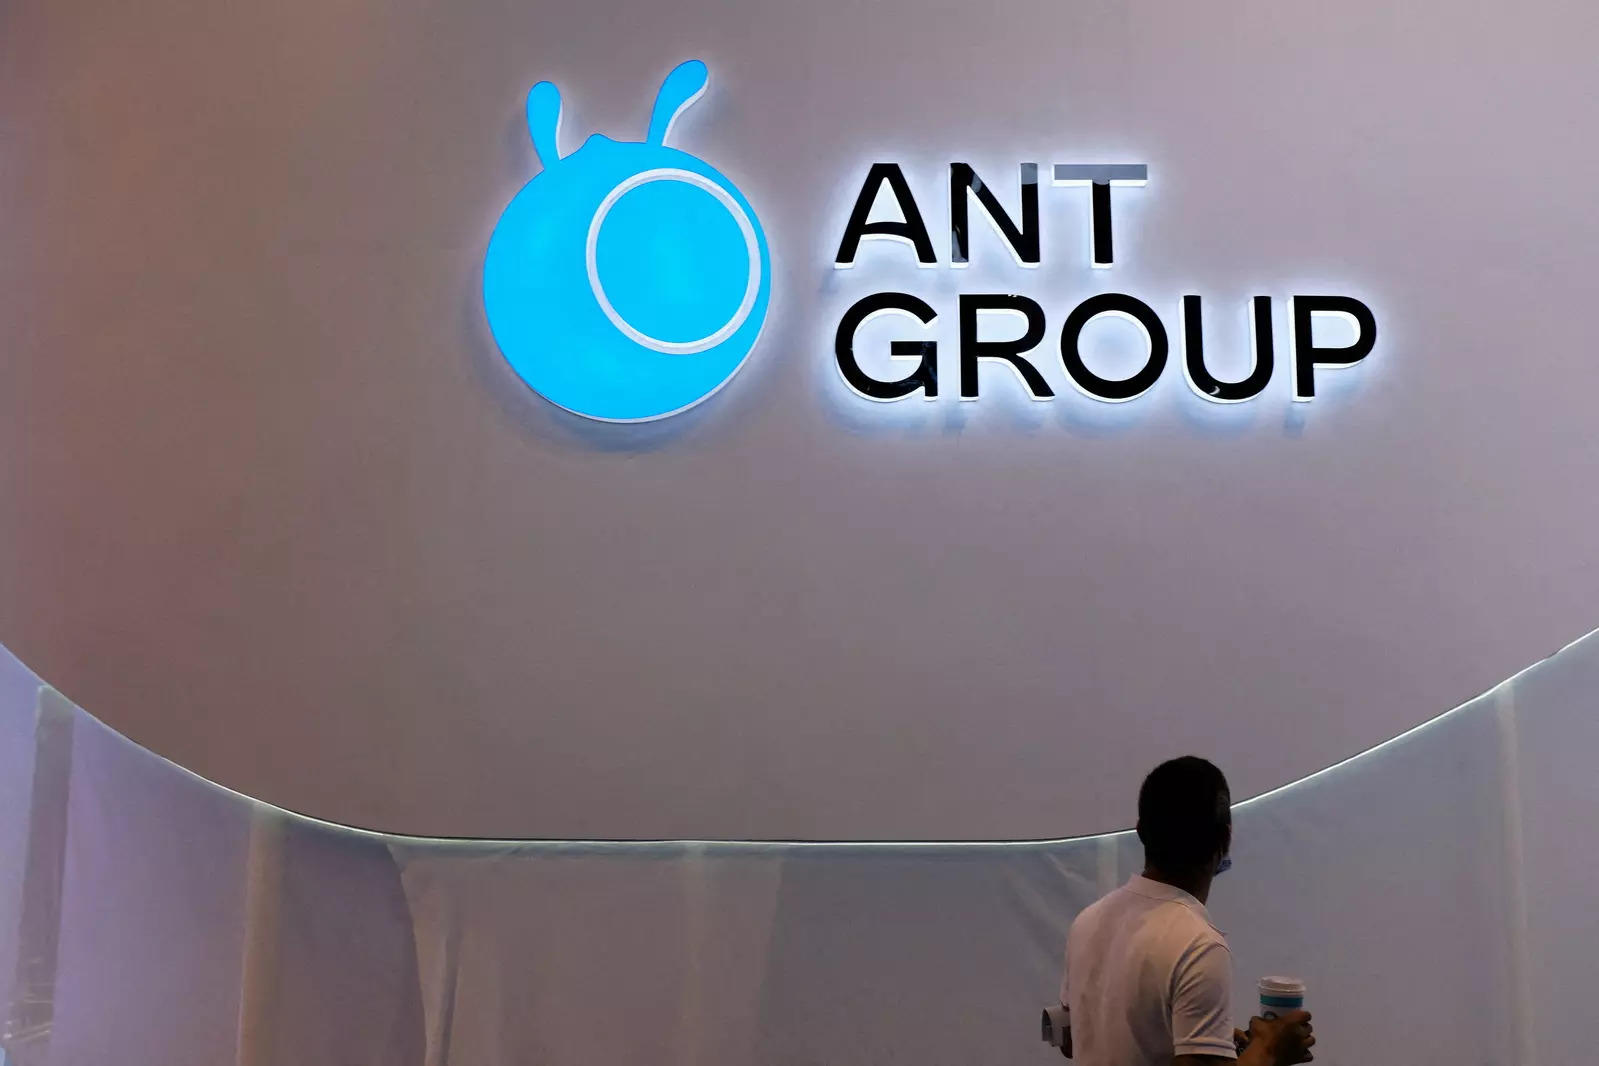 Ant group